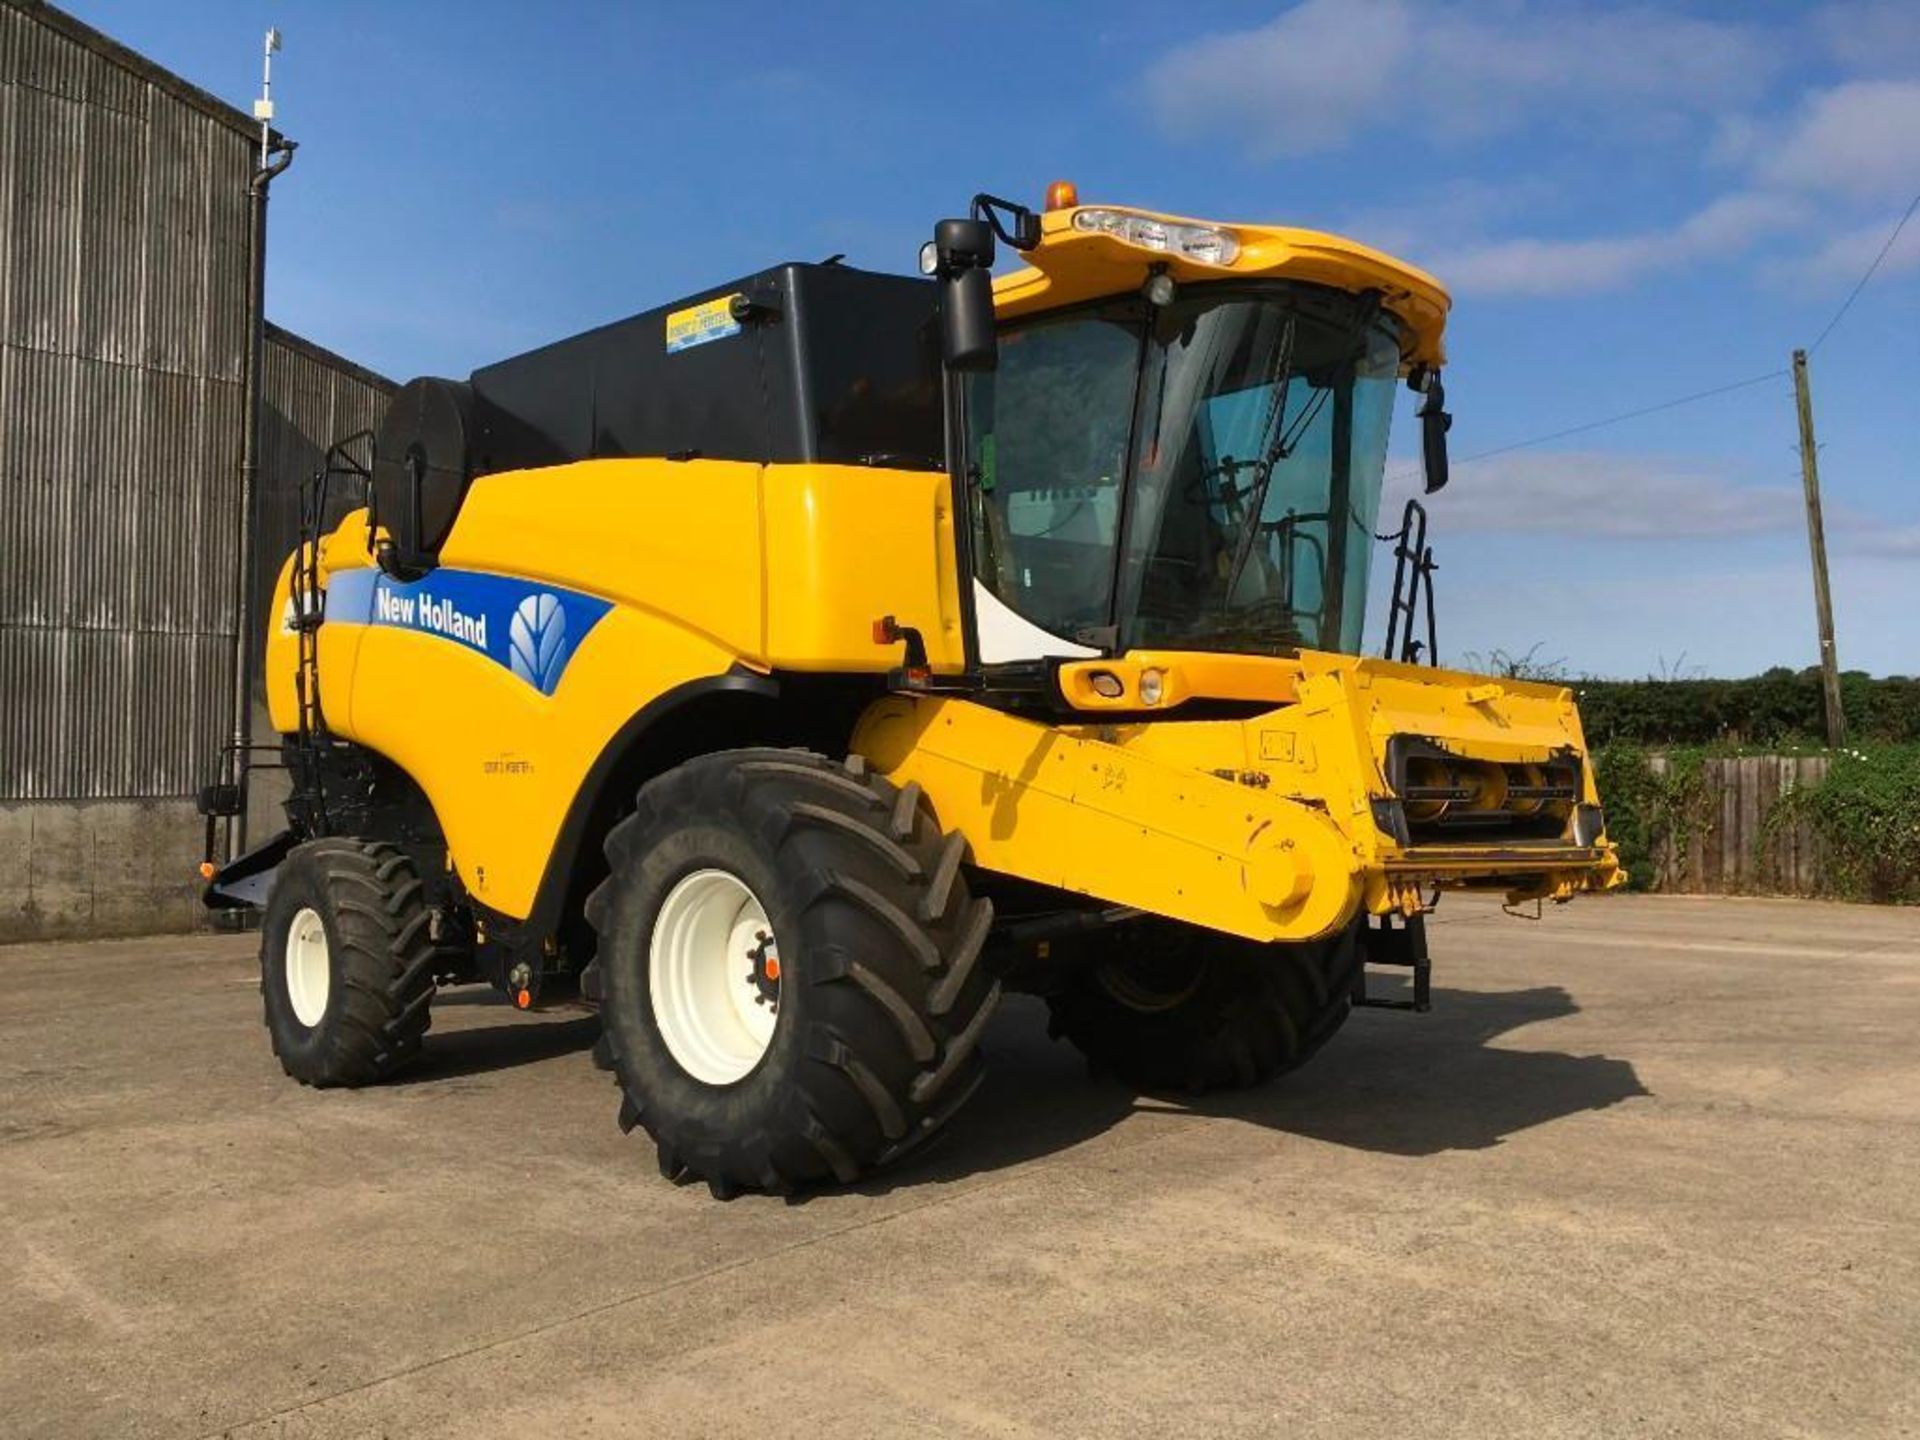 2007 New Holland CX8090 combine harvester with 24ft Varifeed header and trolley. 2wd, 6 straw walker - Image 4 of 14